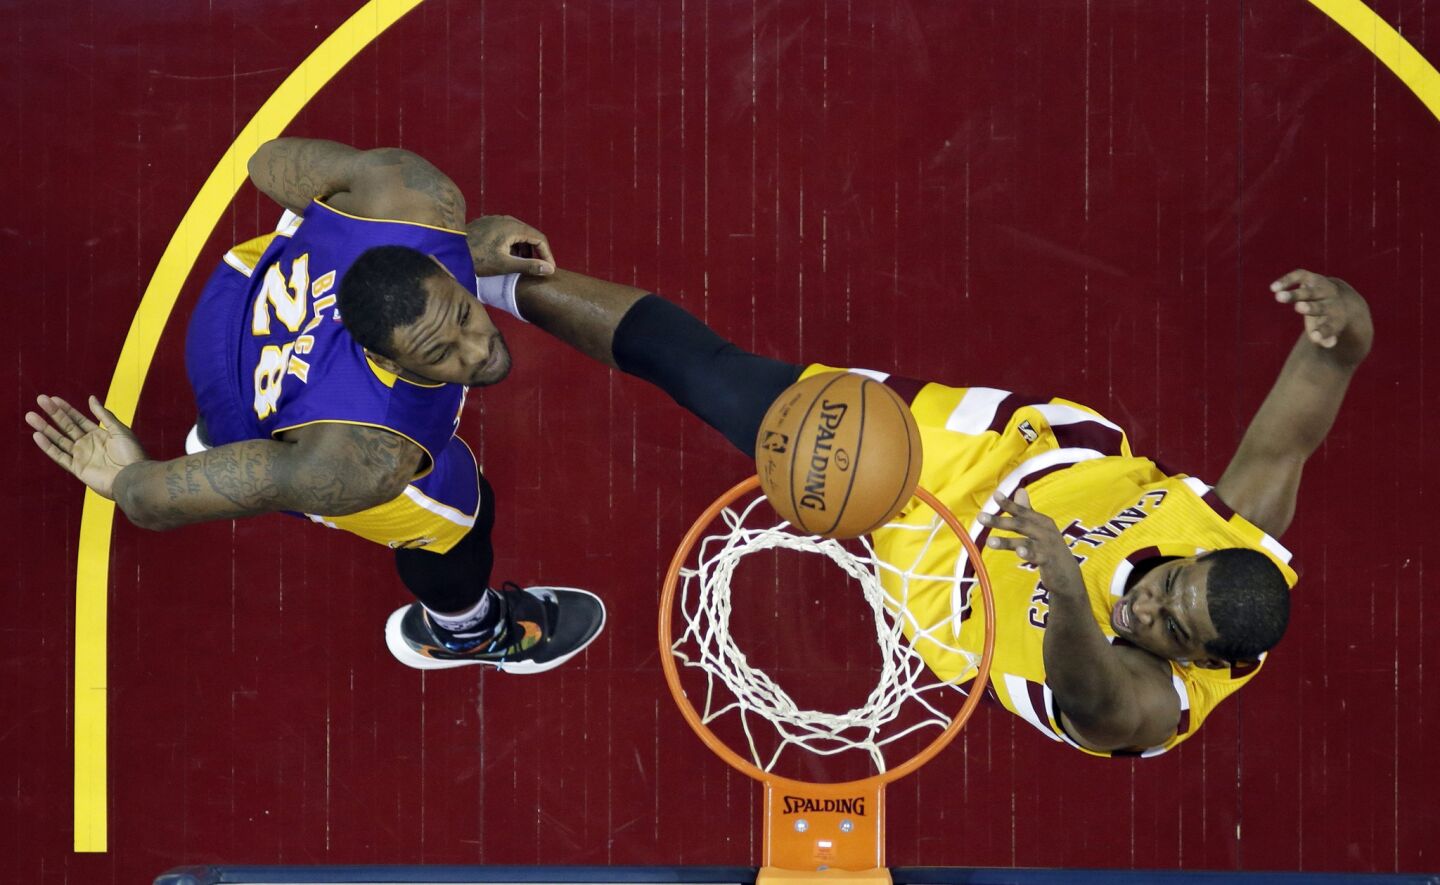 Cavaliers forward Tristan Thompson dunks the ball against Lakers forward Tarik Black during the first half of a game on Feb. 10.